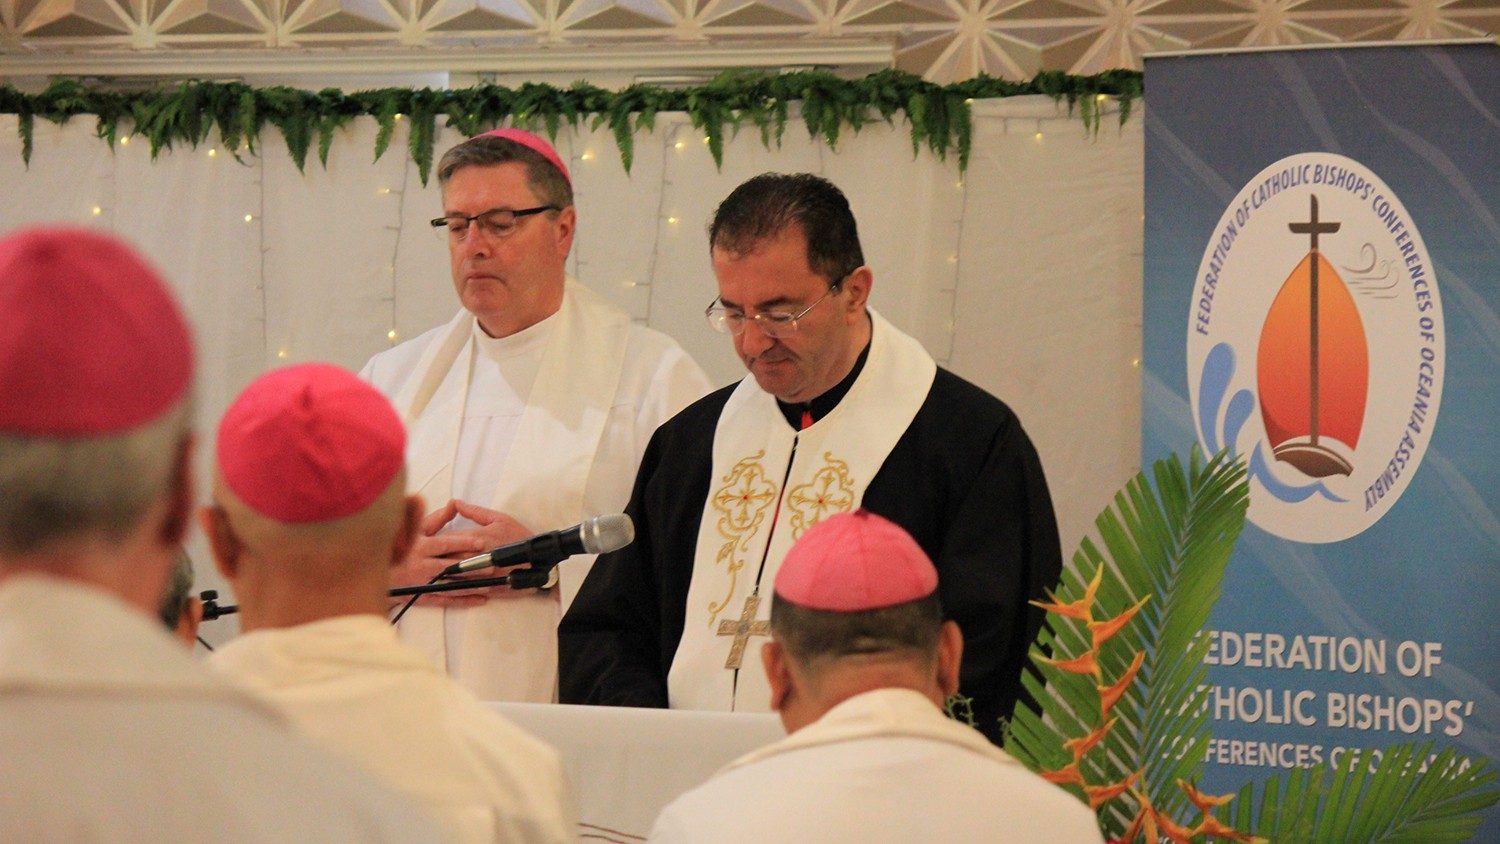 Bishop Tarabay: ‘A synodal Church on a journey of conversion’ - Vatican News